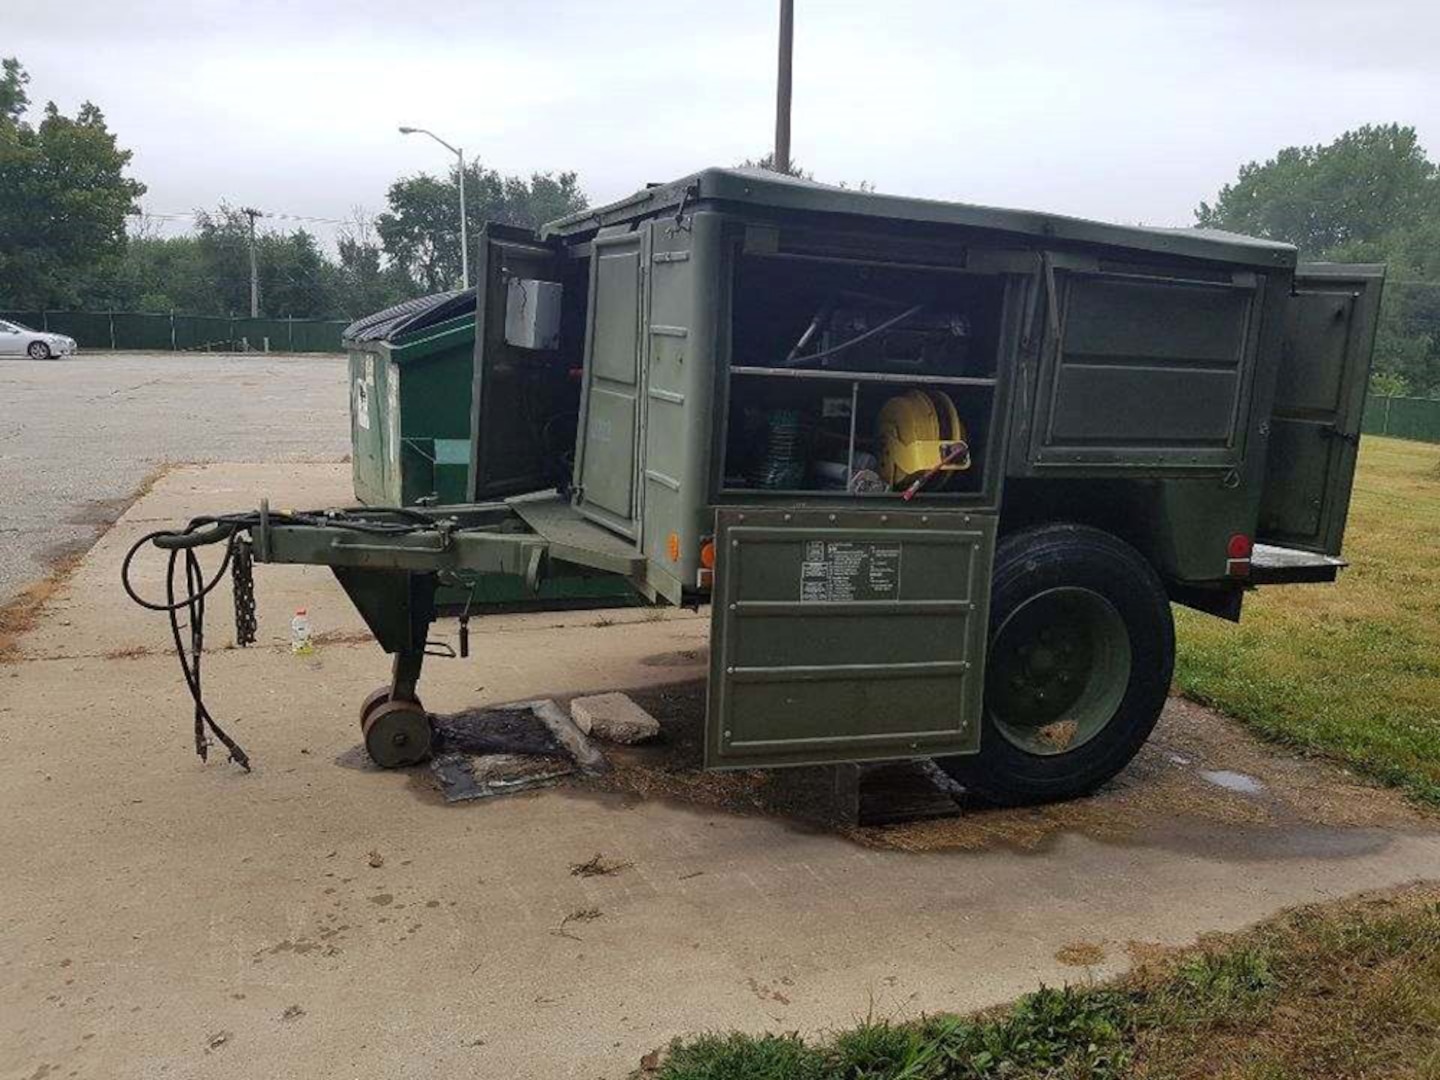 The Marine Corps’ Company C, 6th Engineering Support Battalion, headquartered in Peoria, Illinois, turned in the $42,000 mobile welding station to the DLA Disposition Services site at nearby Rock Island Arsenal.